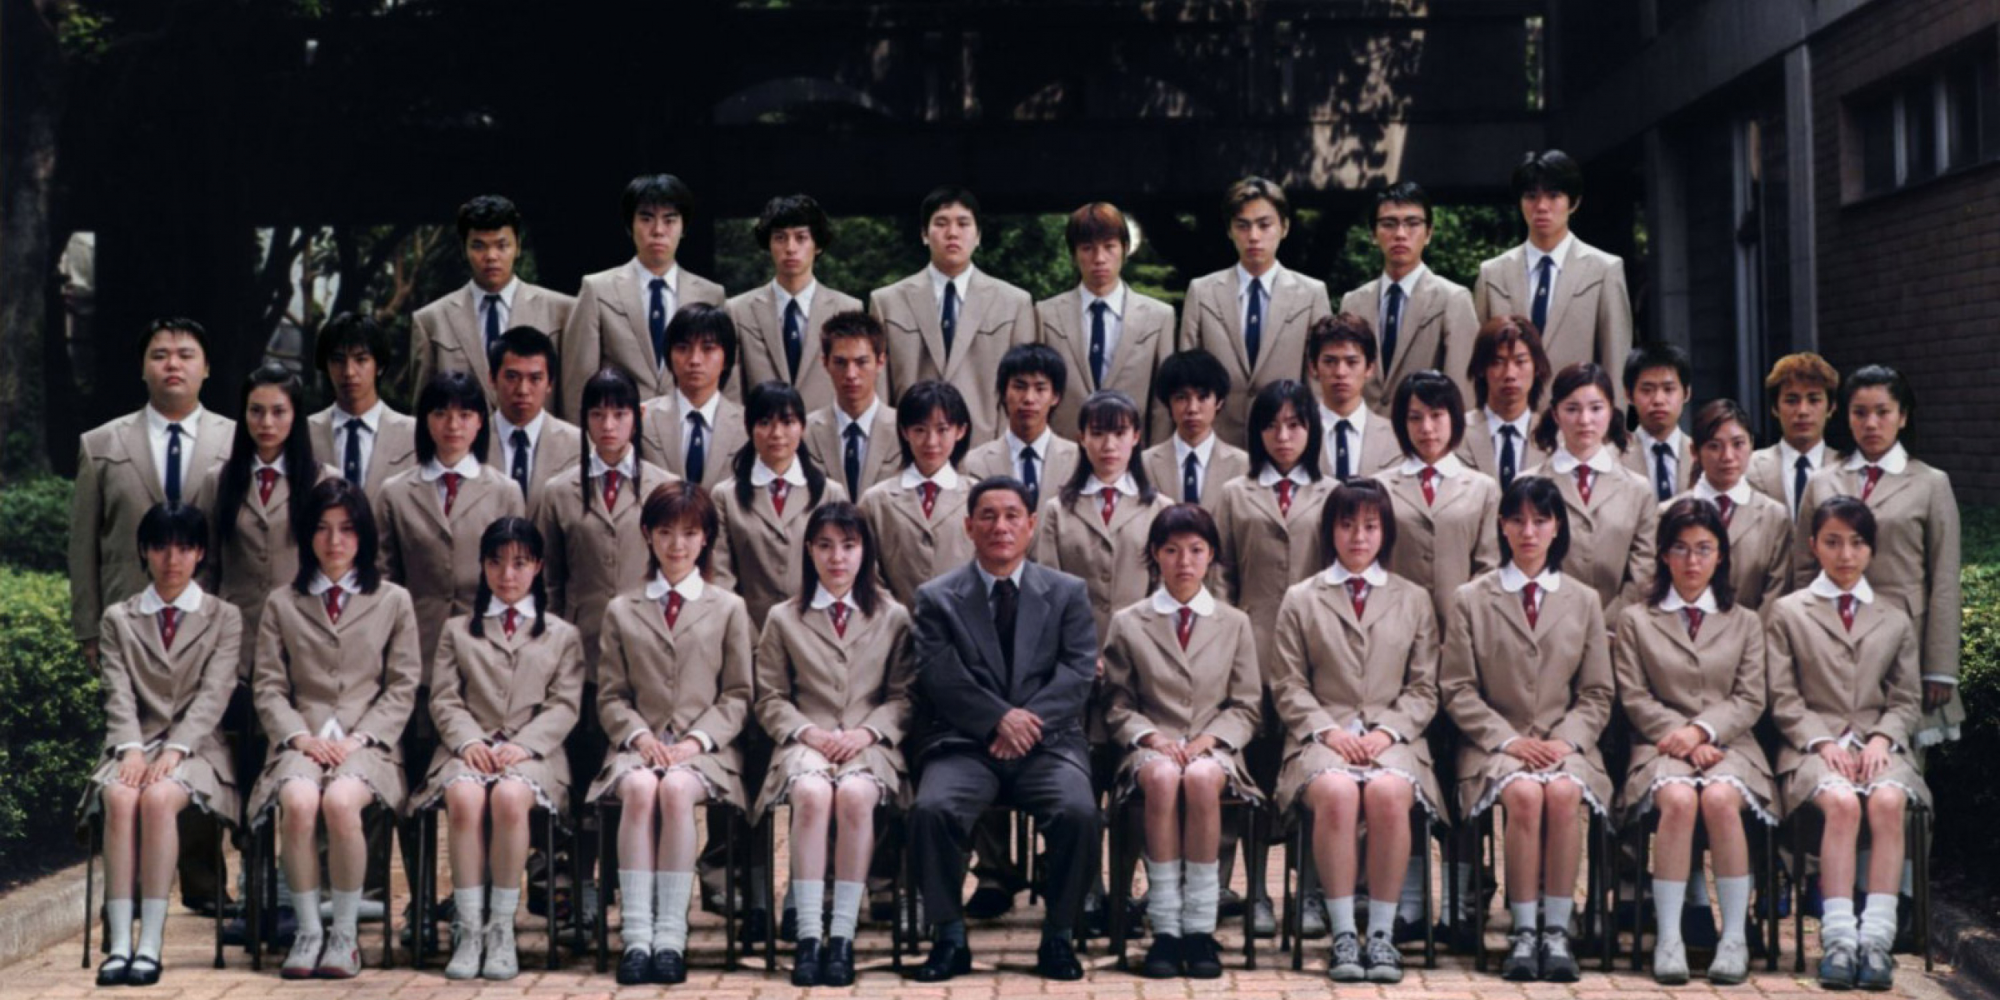 Battle royale the entire cast take a class photo before the events of the movie unfold